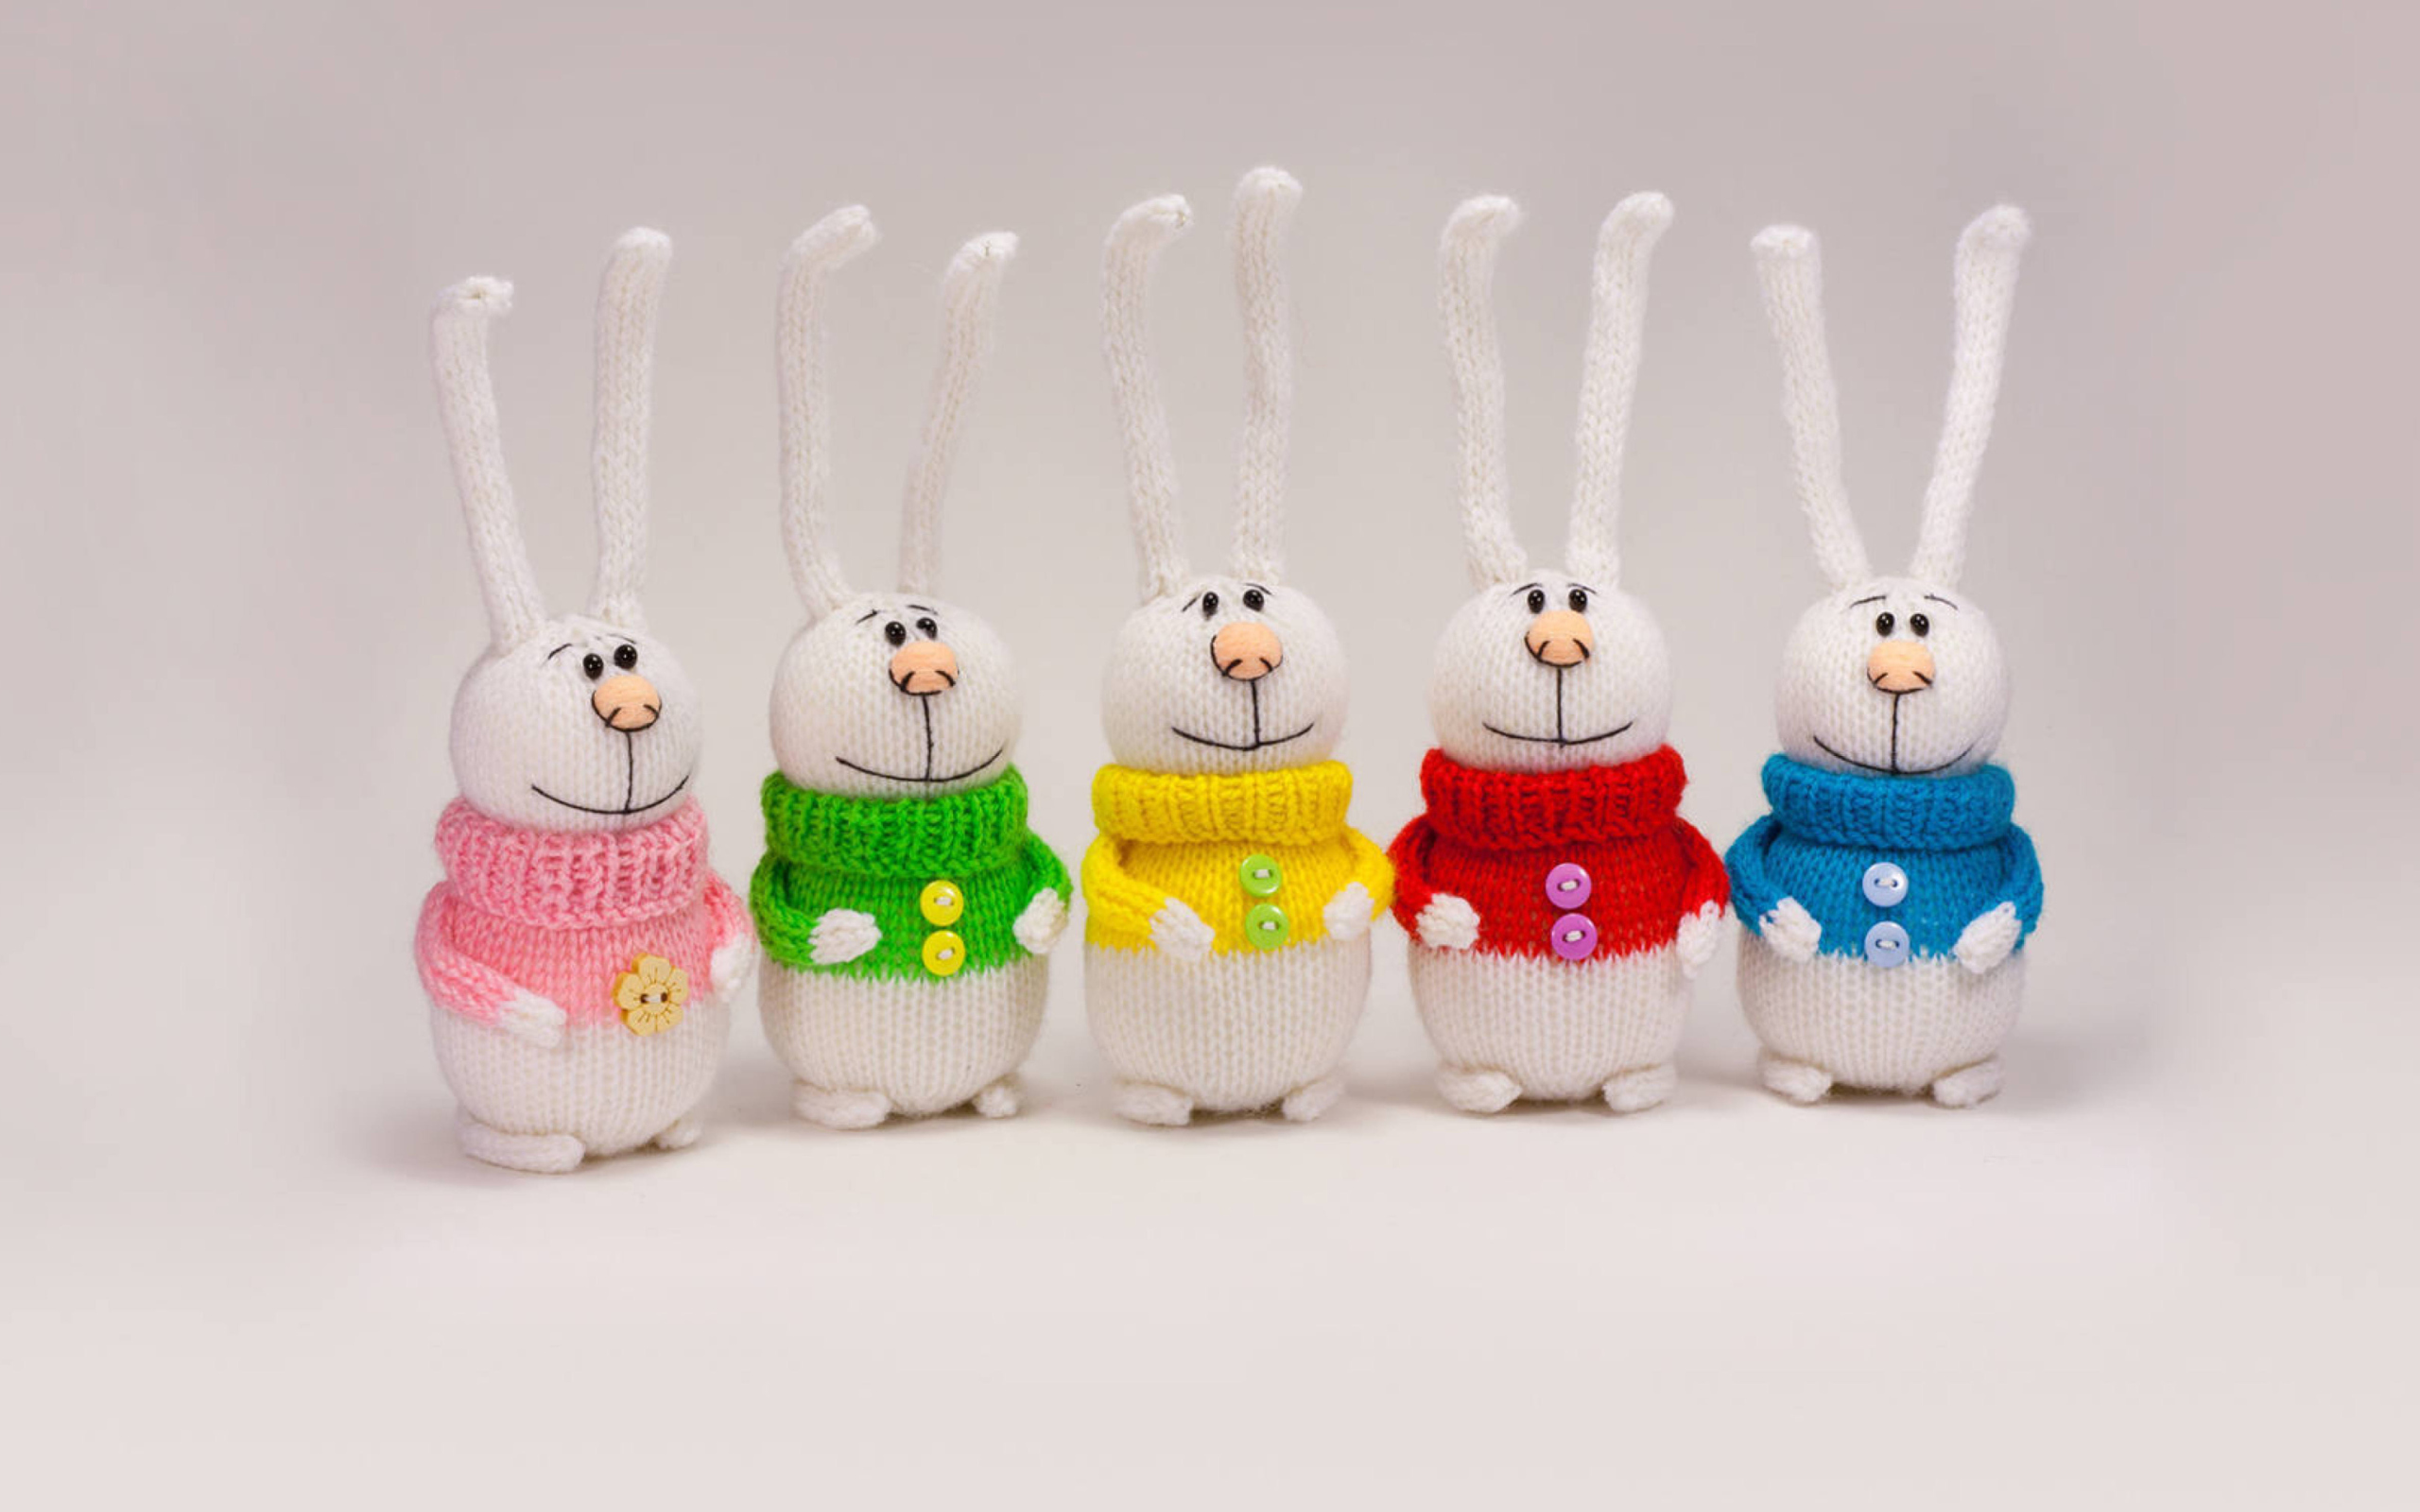 Das Knitted Bunnies In Colorful Sweaters Wallpaper 2560x1600